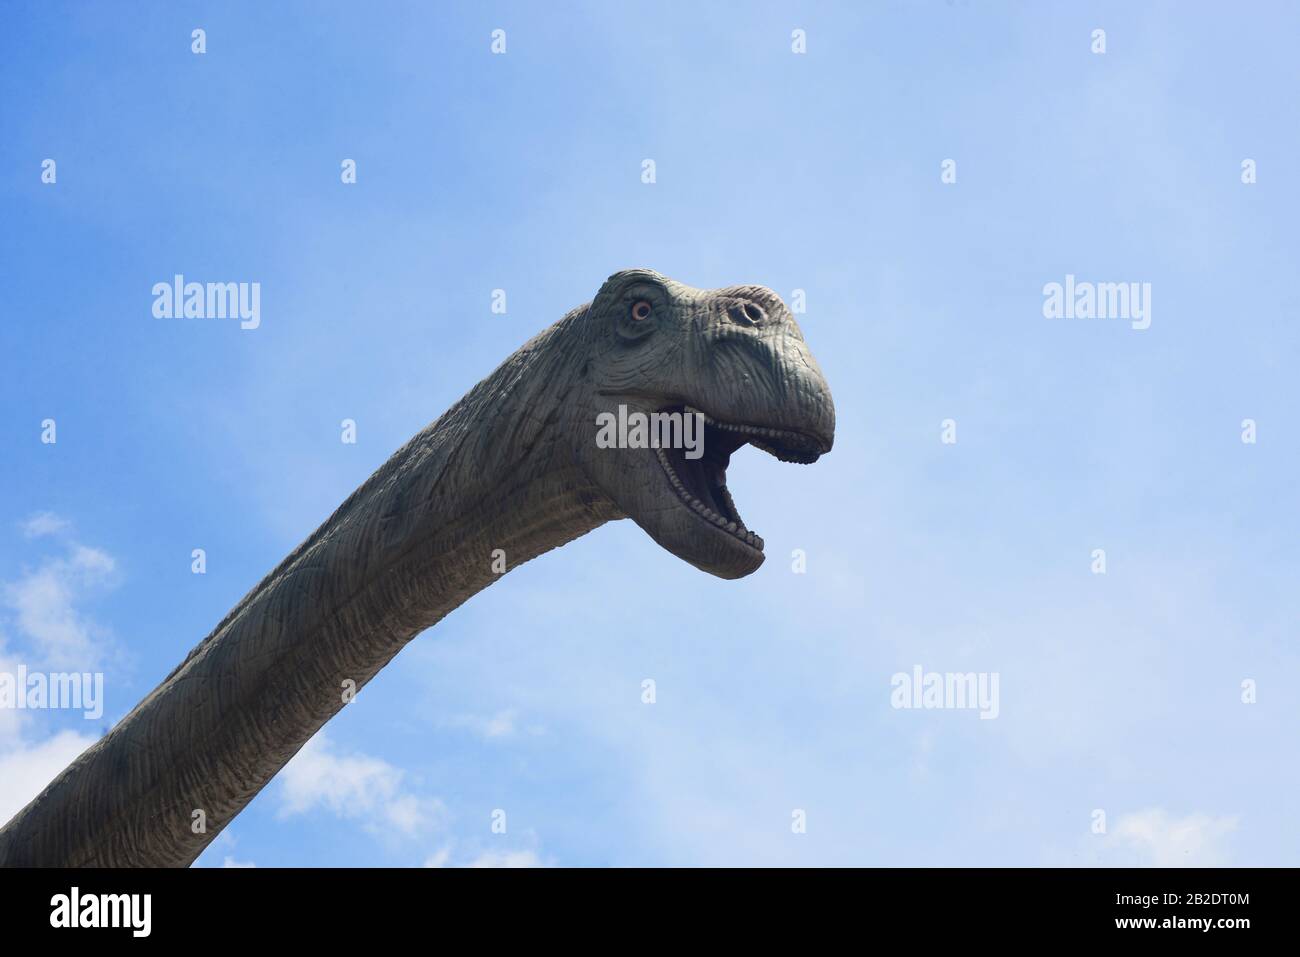 historical sculptures of dinosaurs in the open air in Whale on Hainan Island Stock Photo